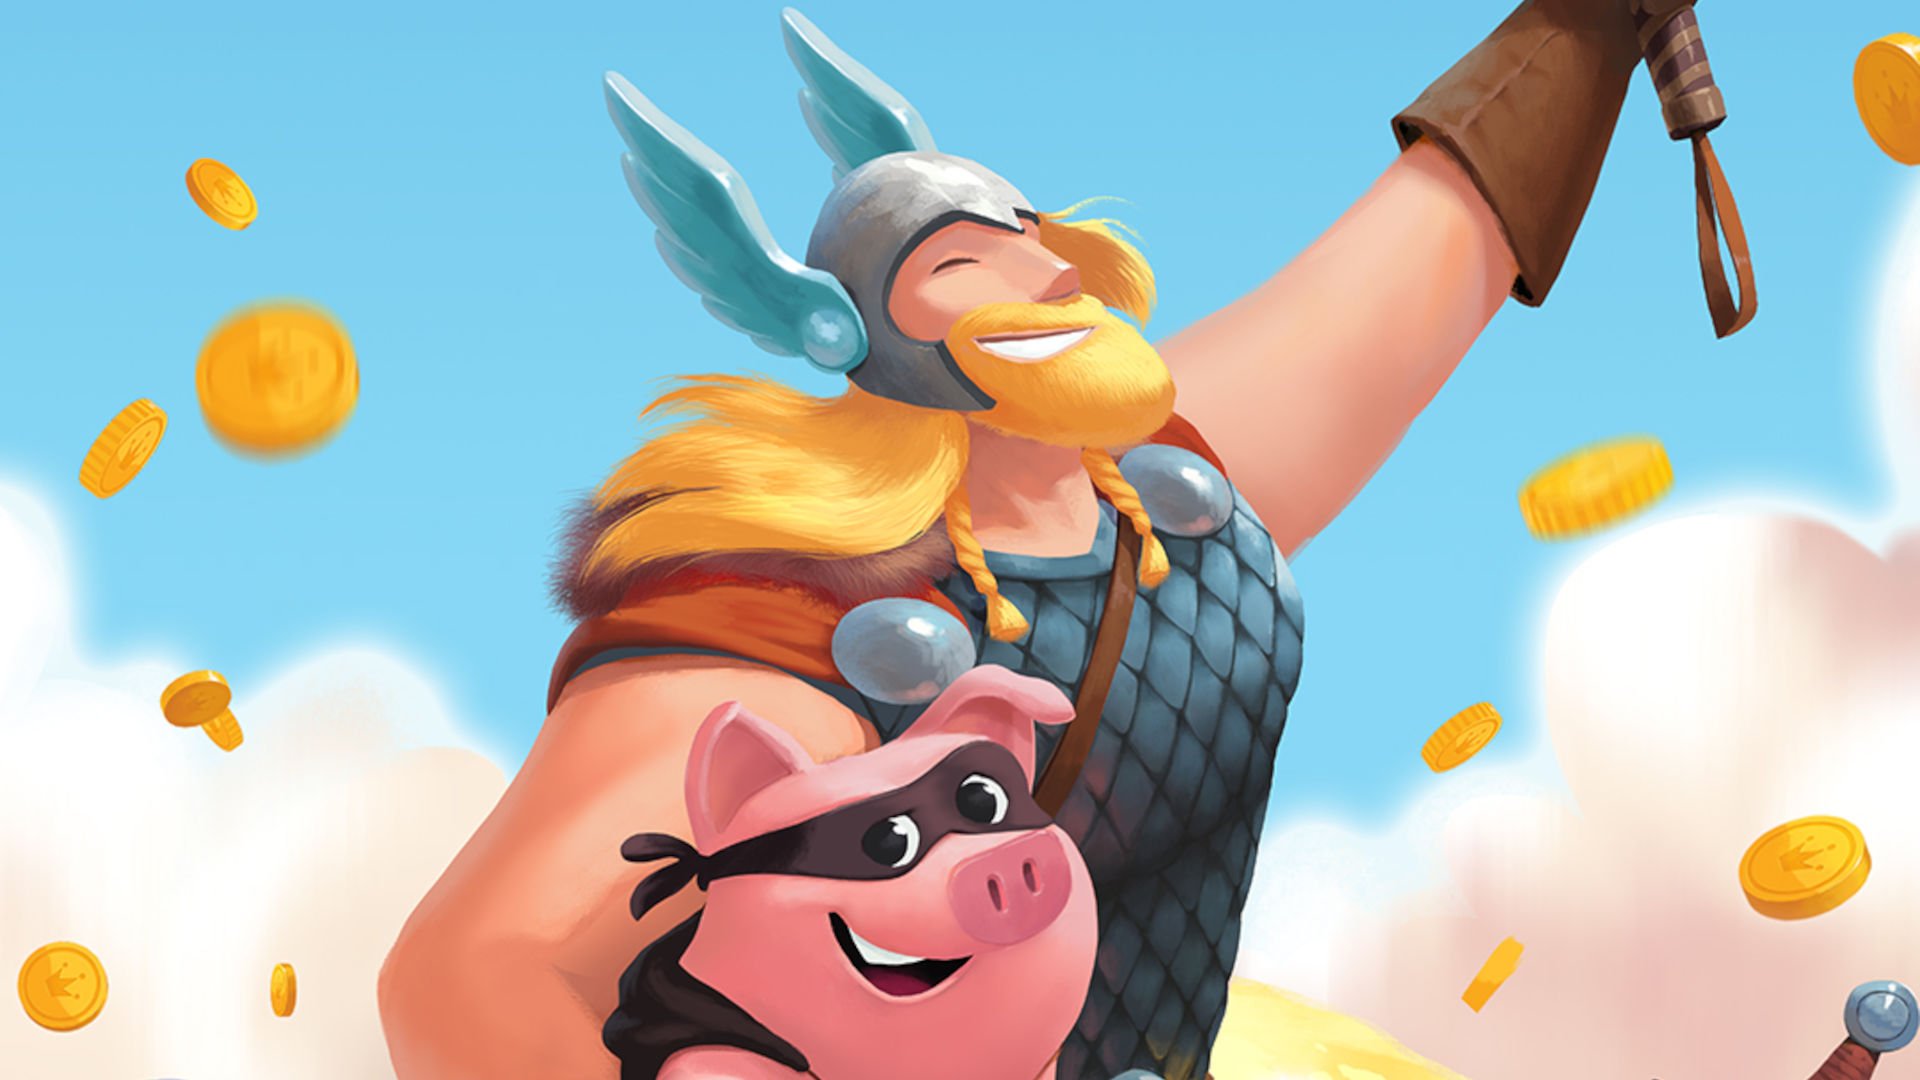 Thor hugs a pig in a mask in Coin Master.